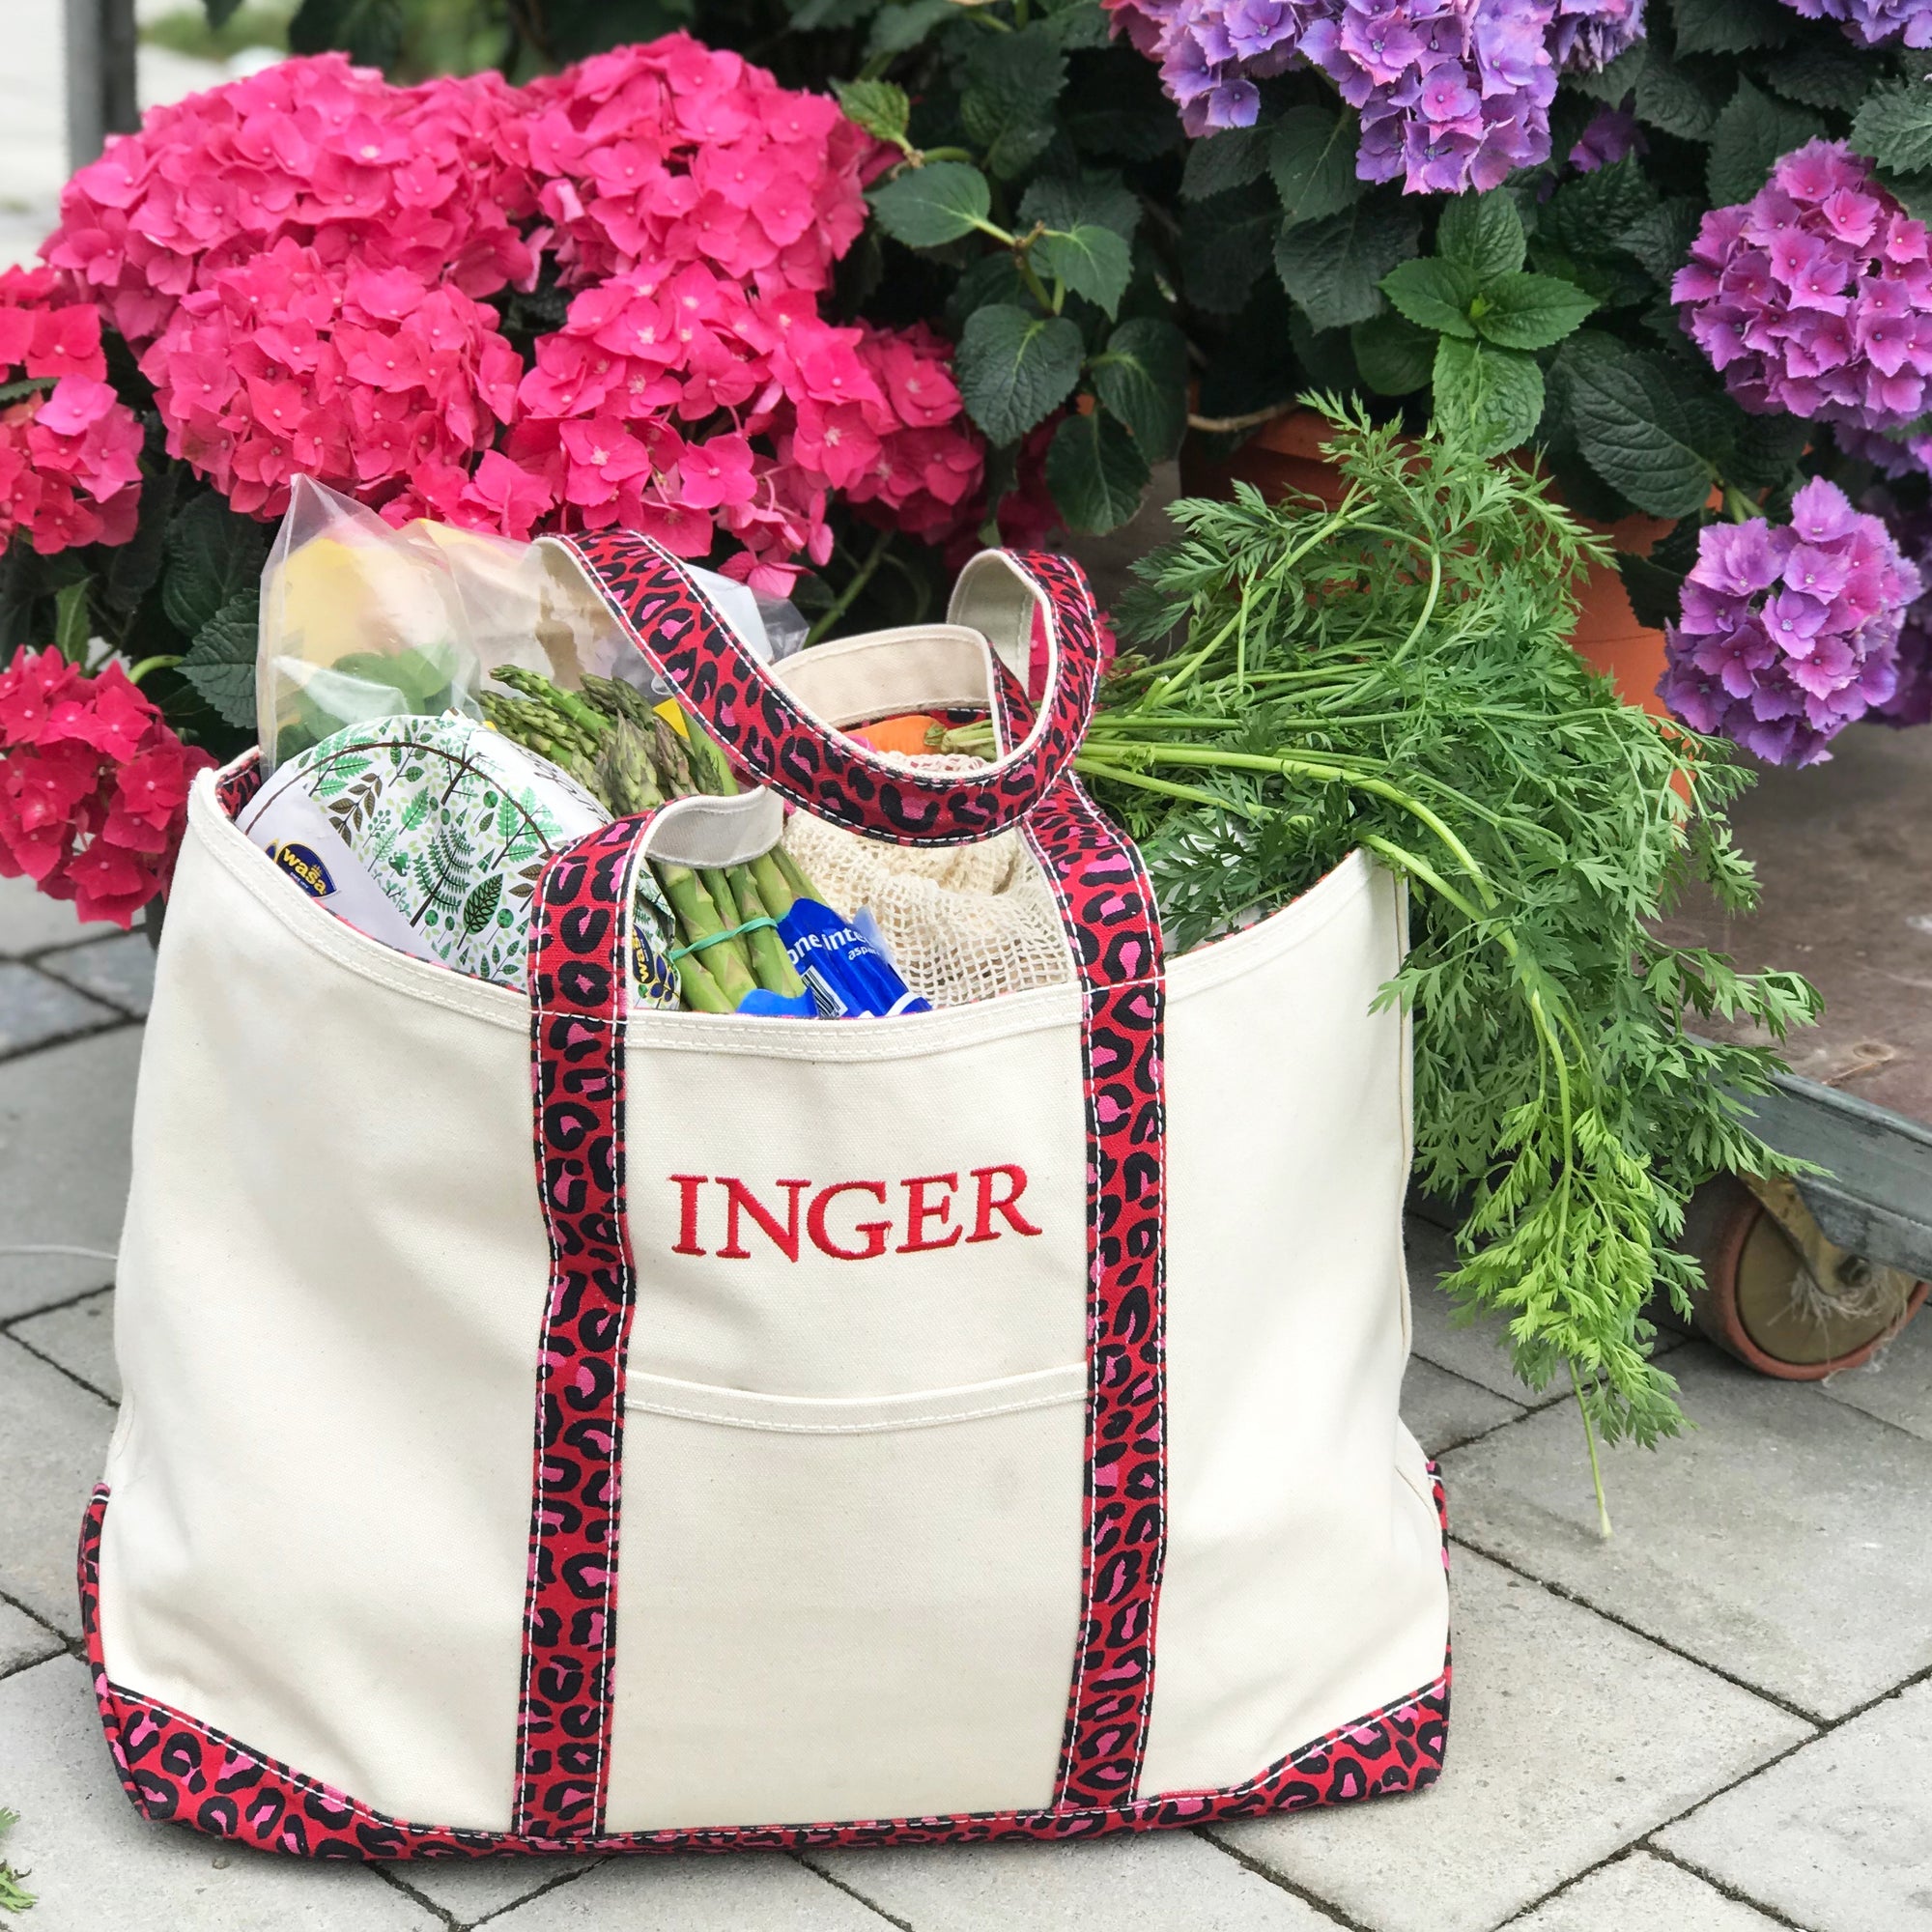 Our totes truly are the best shopping companions